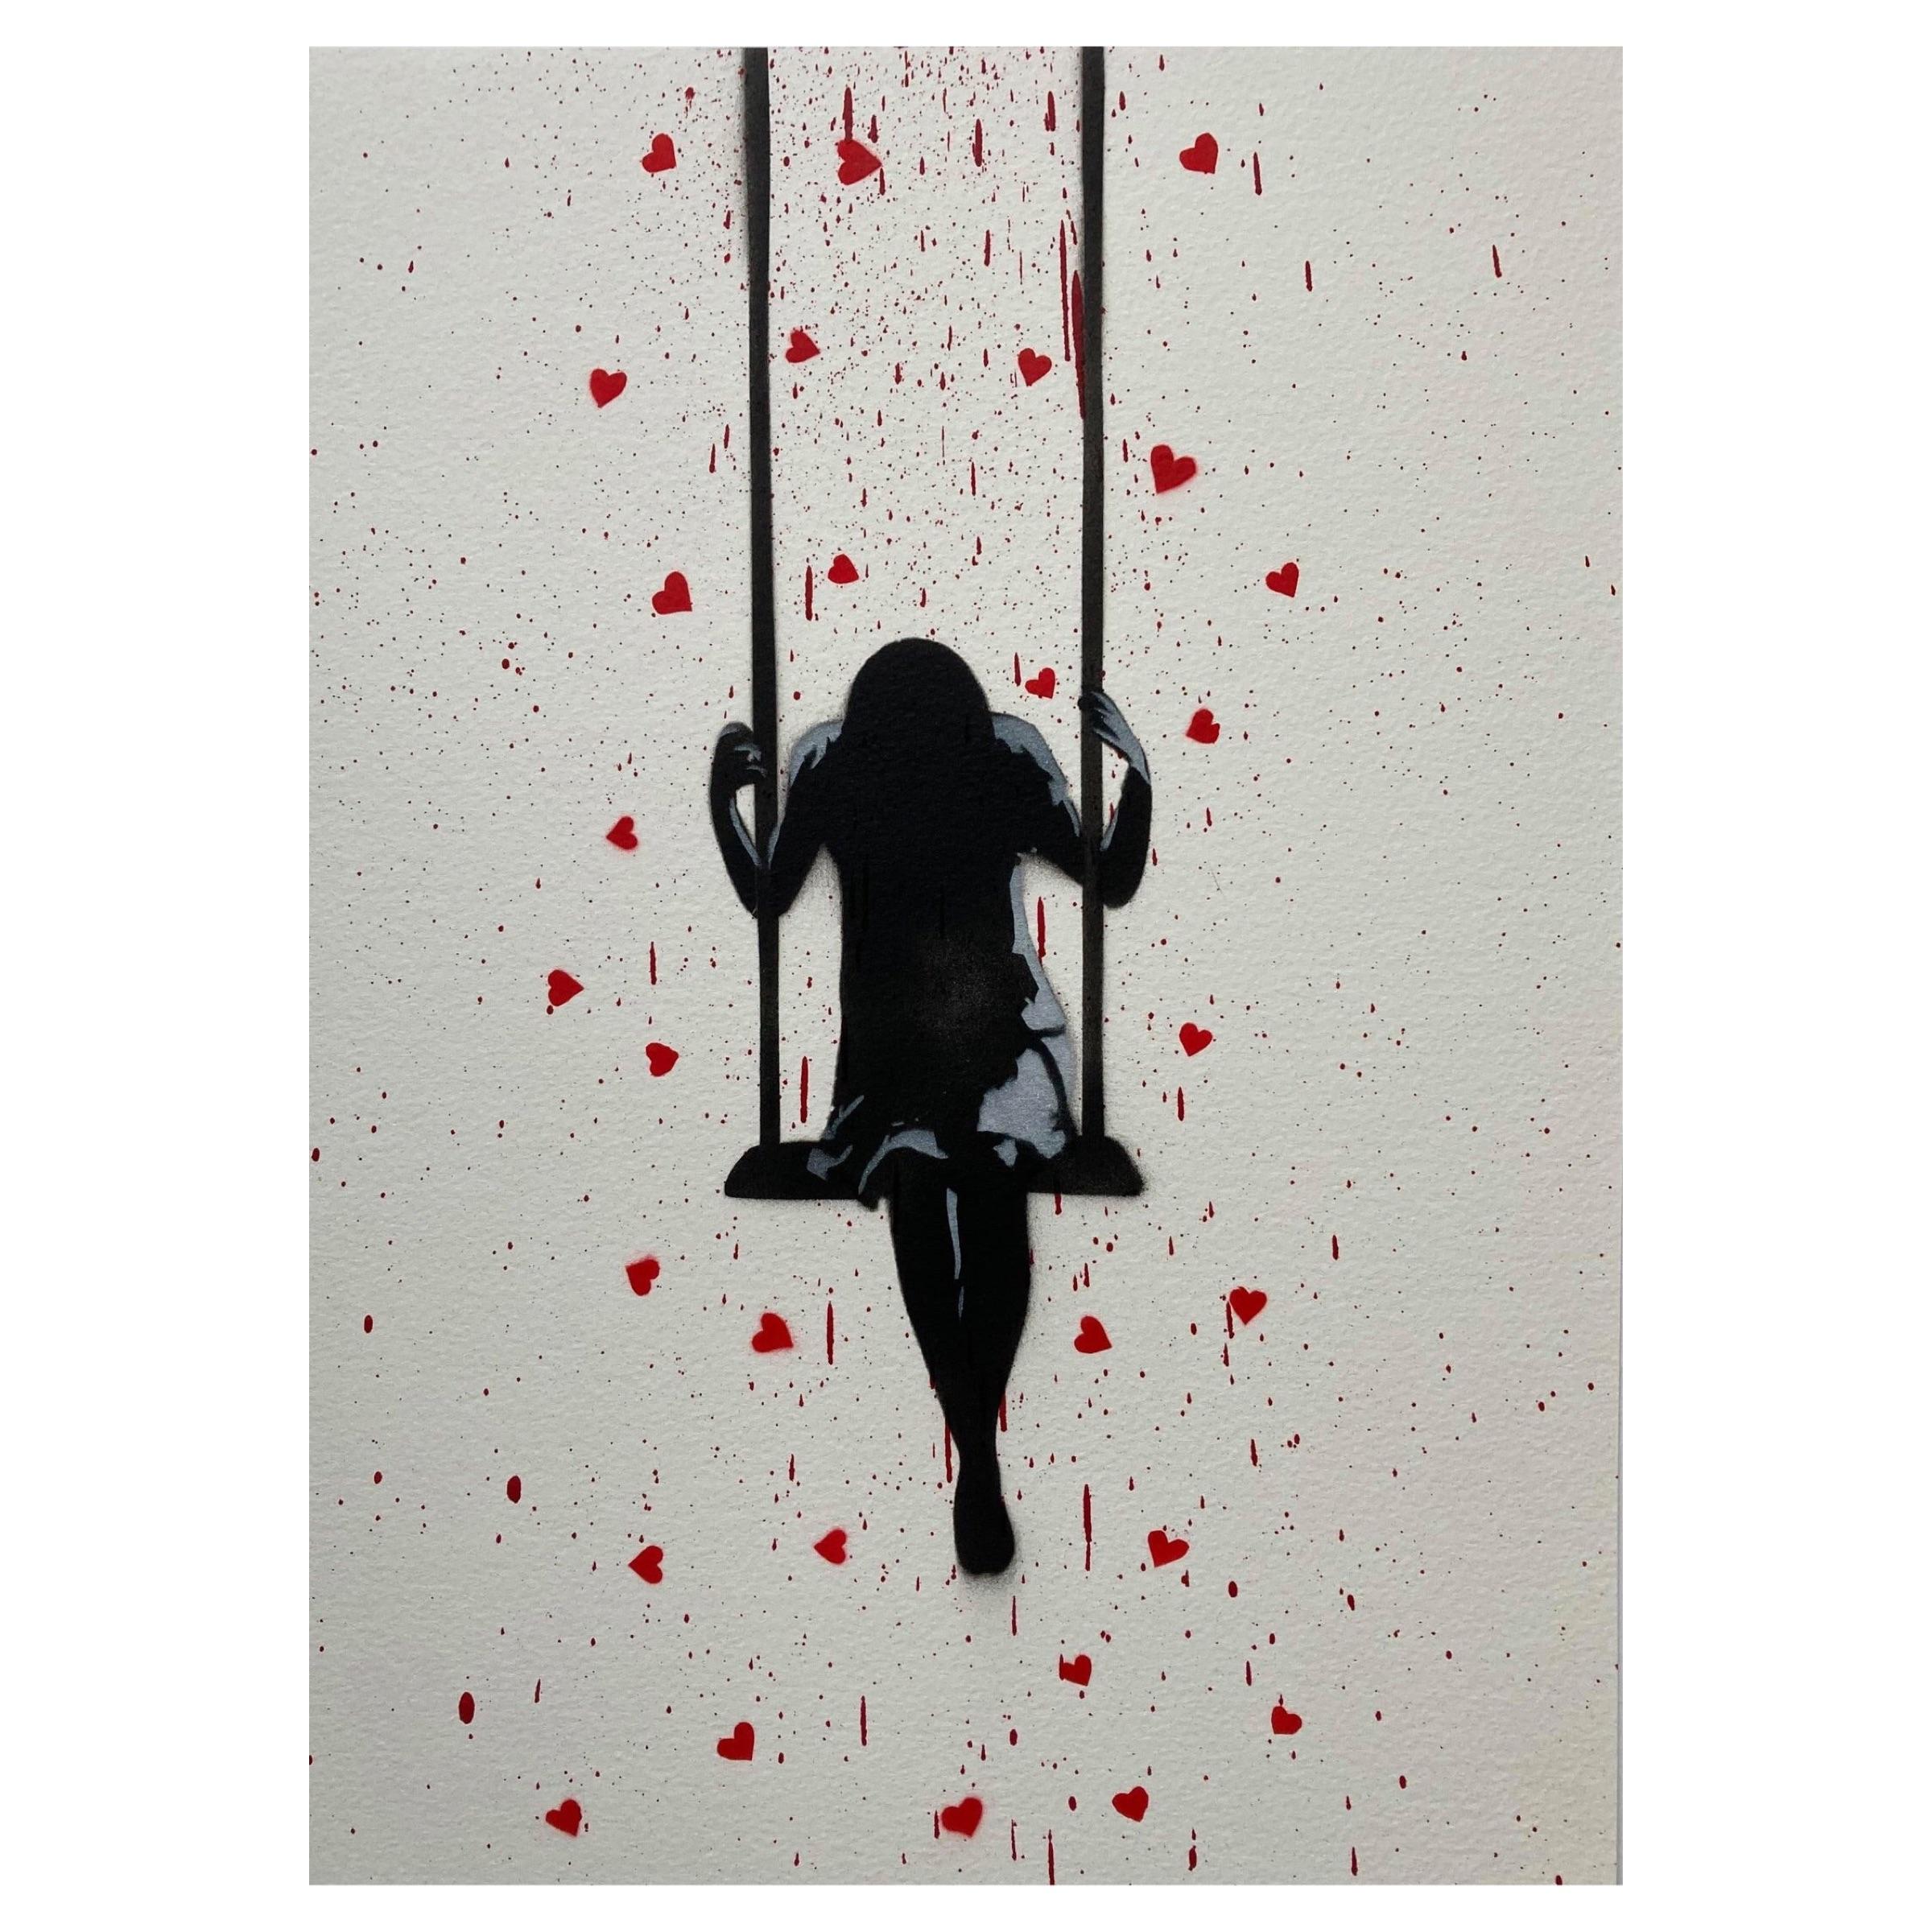 Swinging through showers of affection Print by Madderdoit